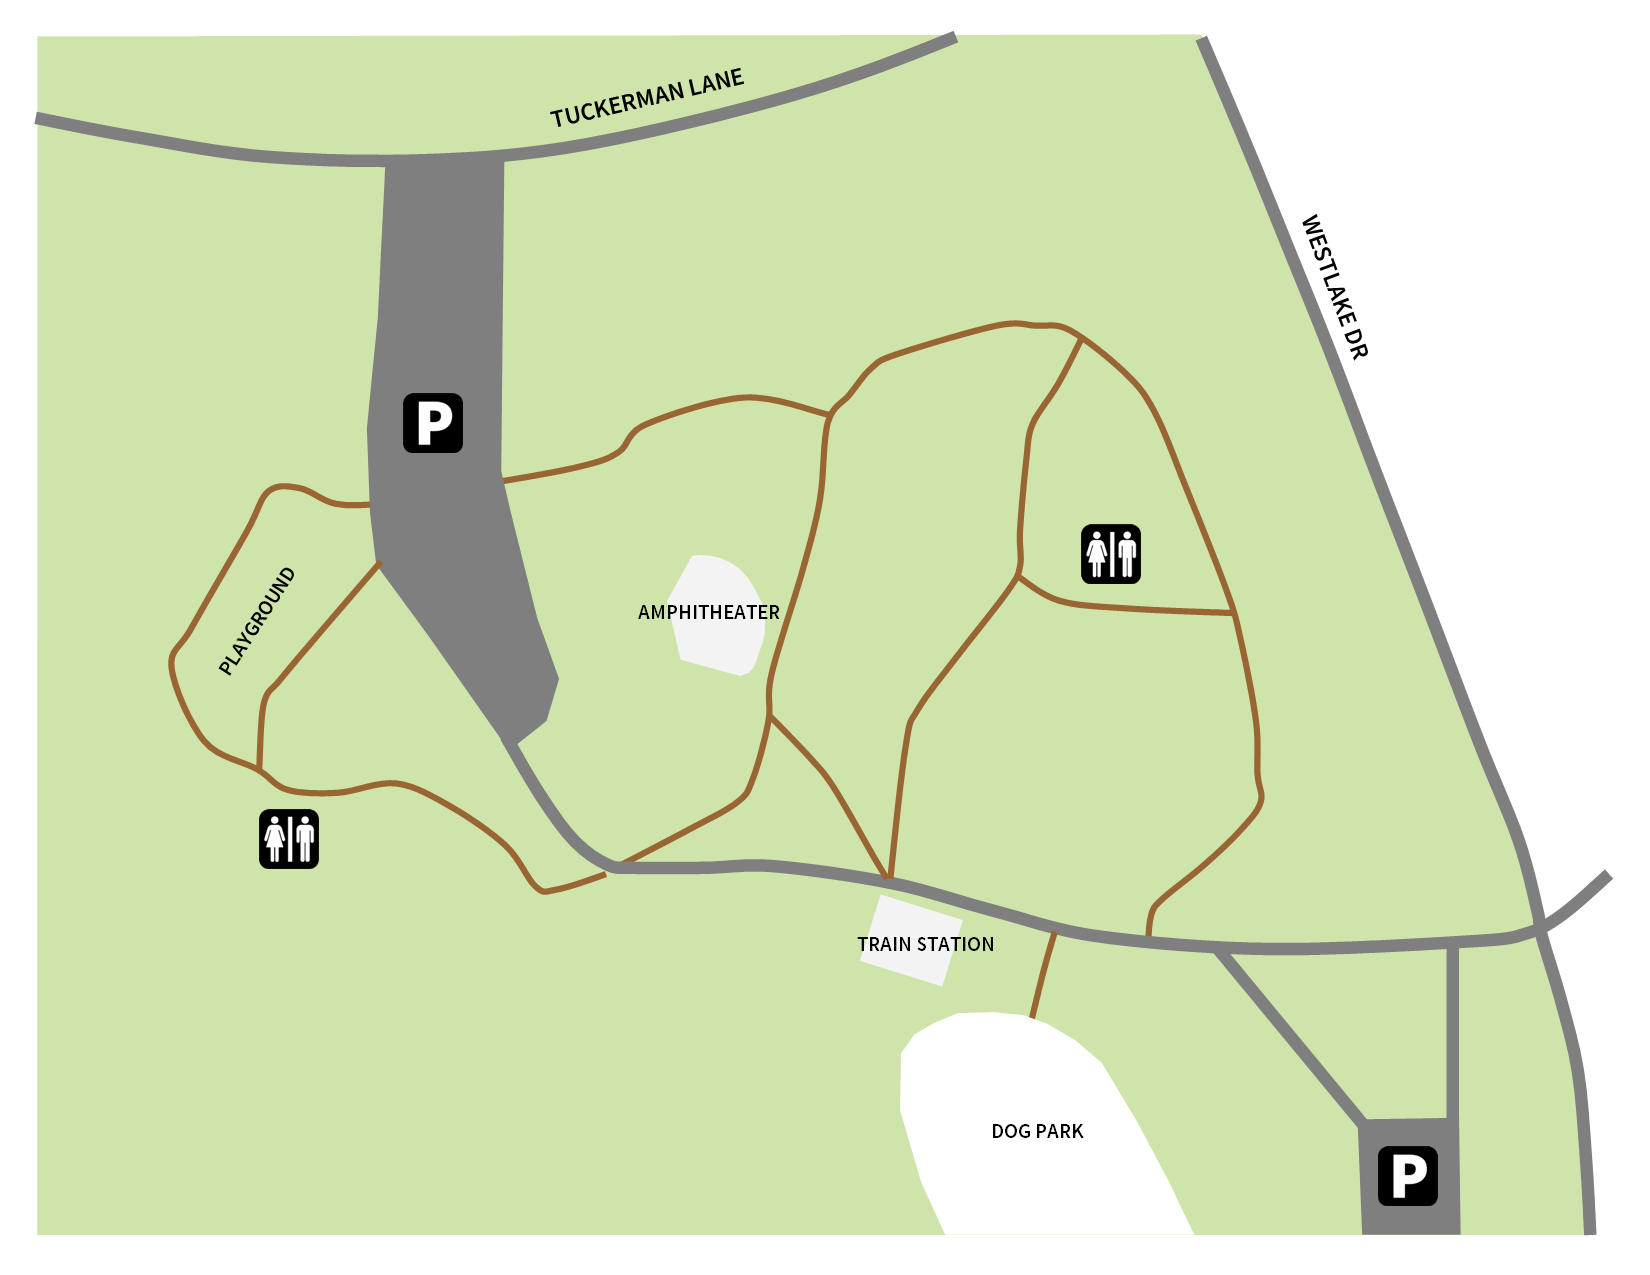 Images shows aerial view of Cabin John Regional Park. P on the map symbolizes Parking available at two entrance points, one on Tuckerman Lane and one of West Lake Drive, available restrooms, train station, enclosed dog park, and playground. 